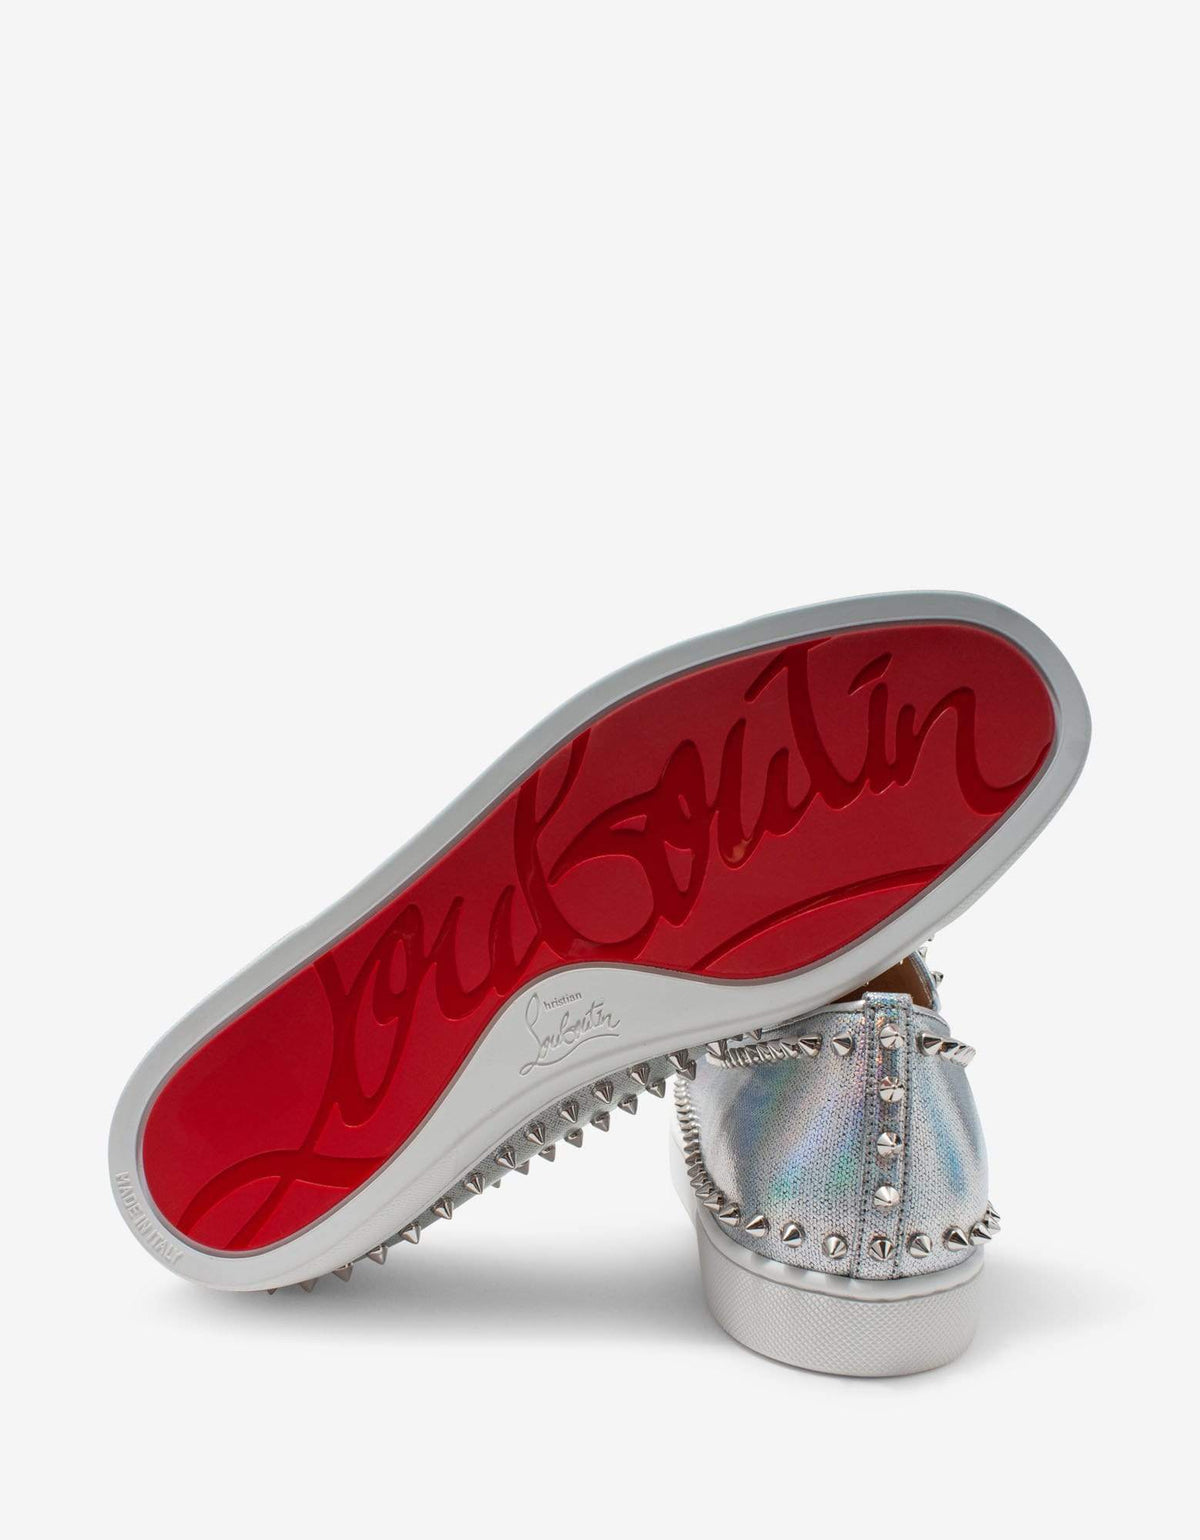 Christian Louboutin Pik Boat Silver Coated Canvas Trainers -